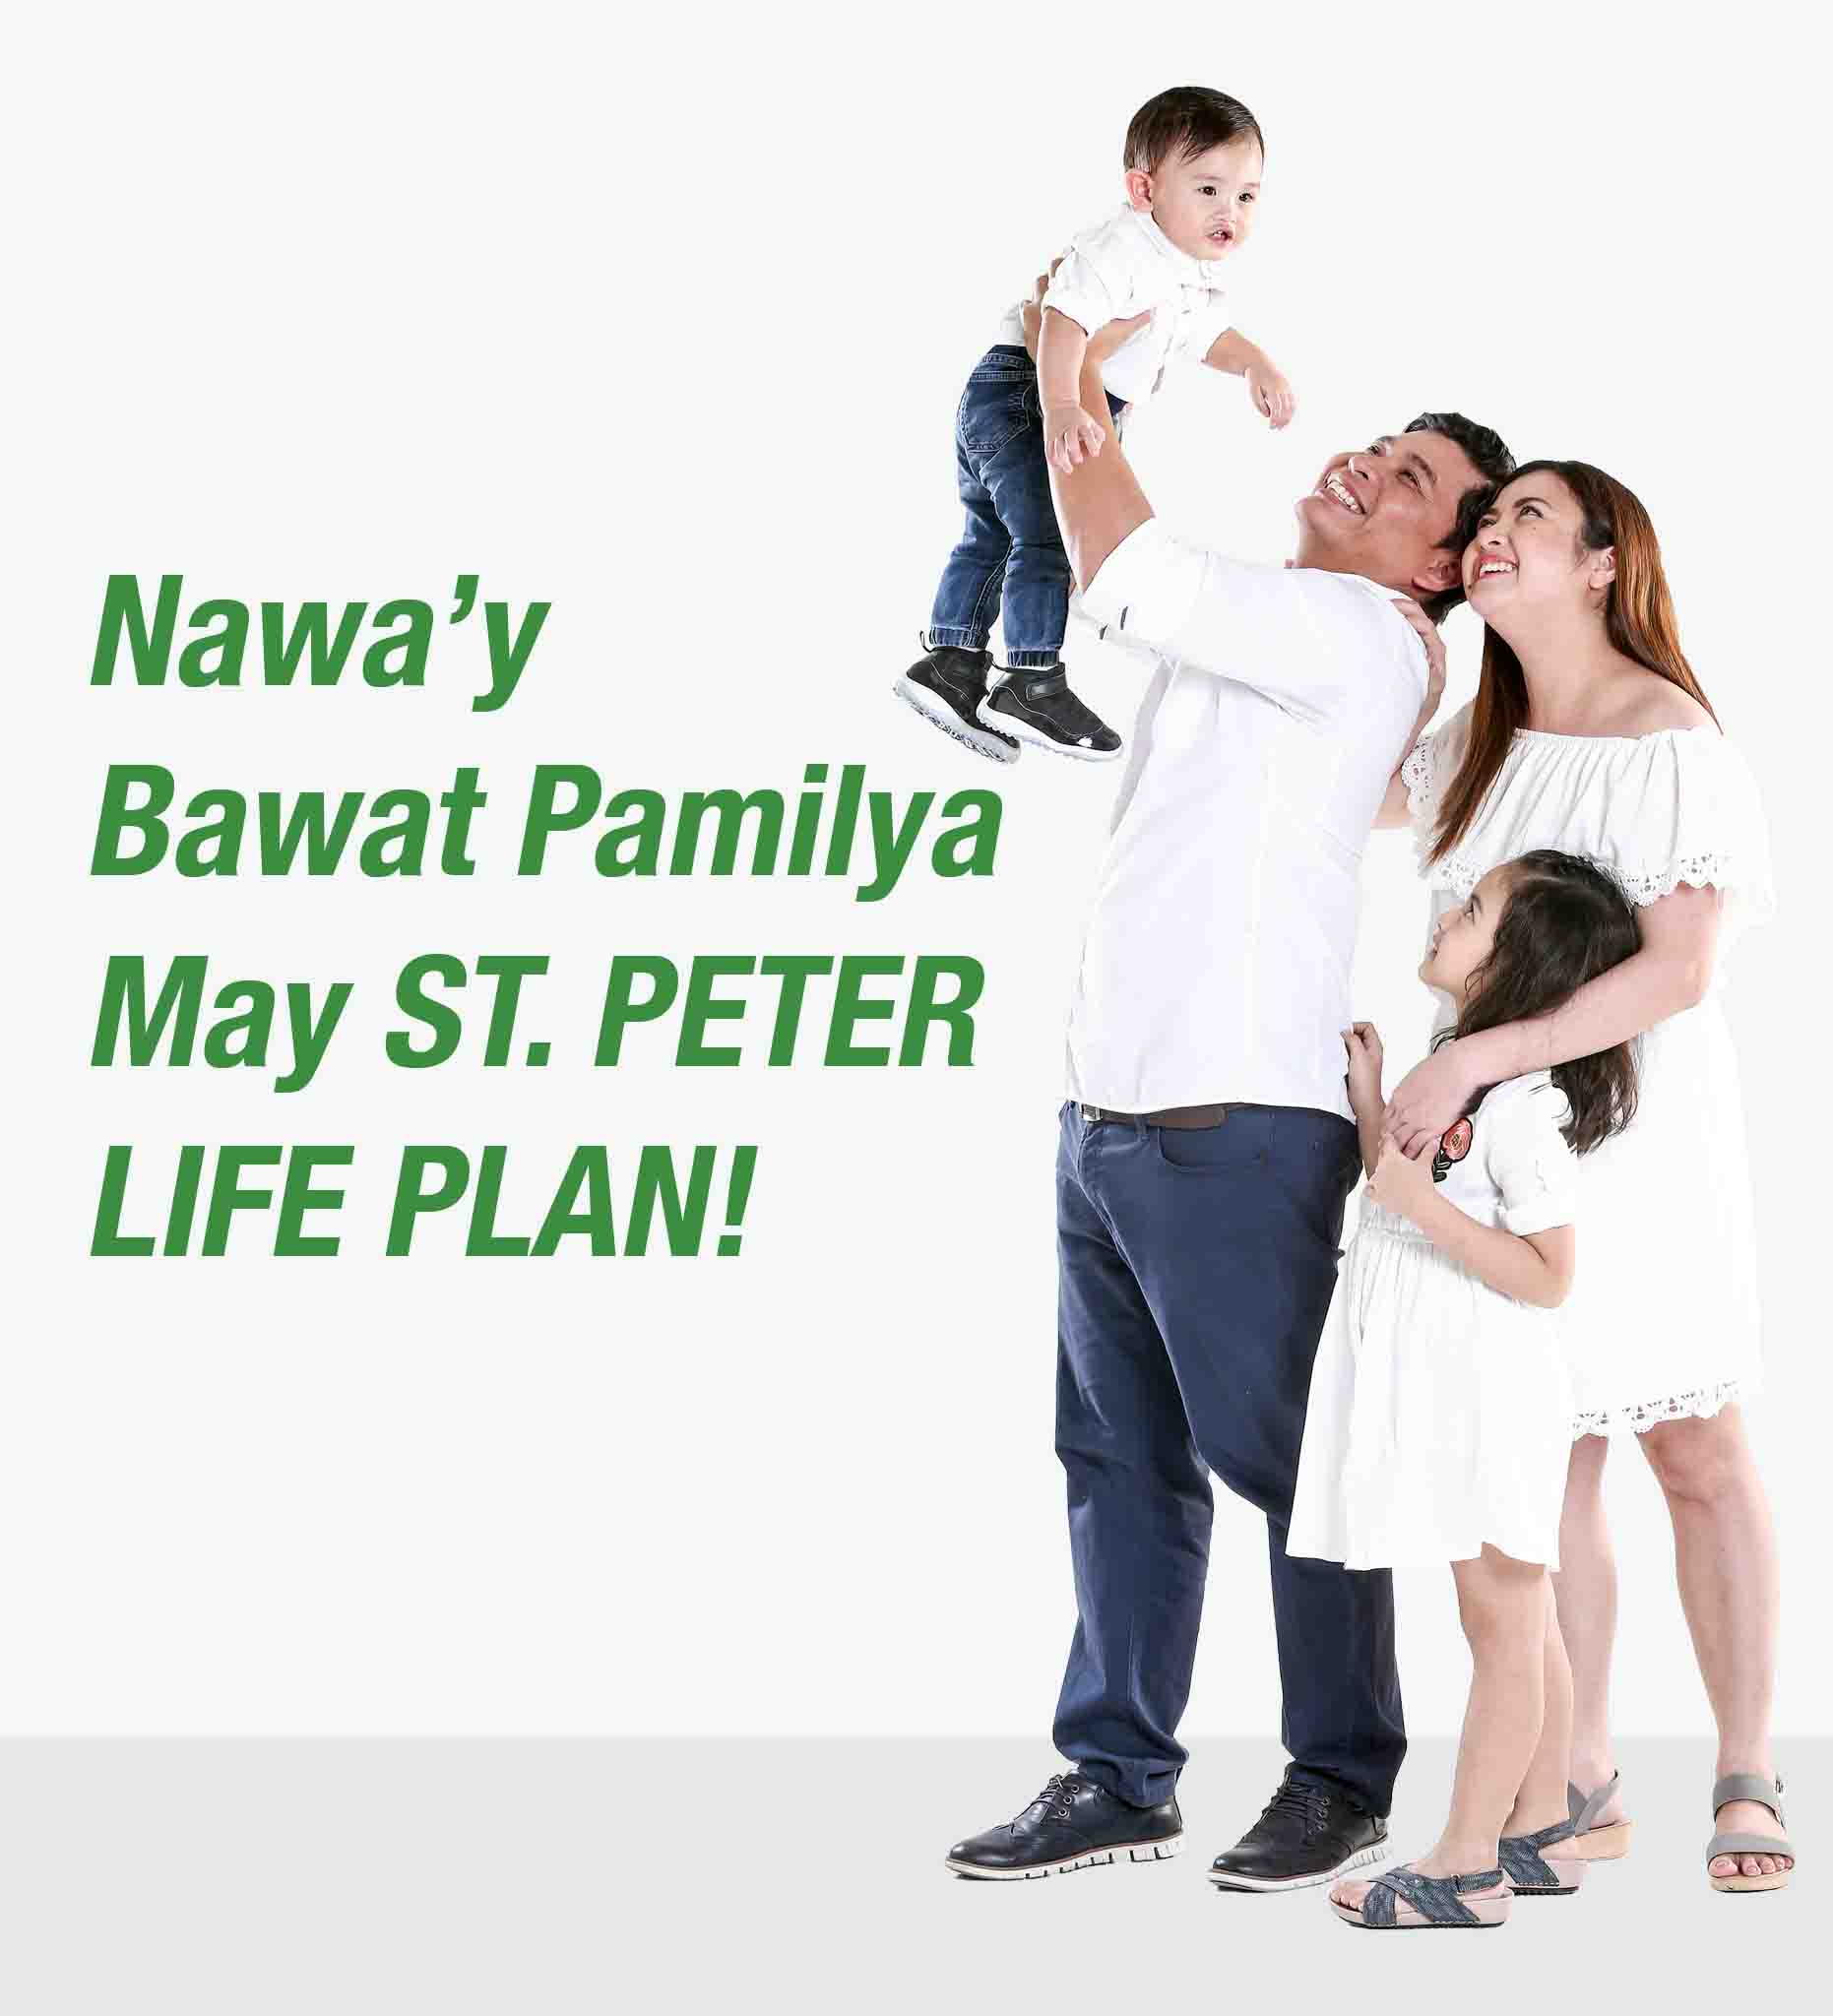 Sign up online and get the St Peter life plan benefits